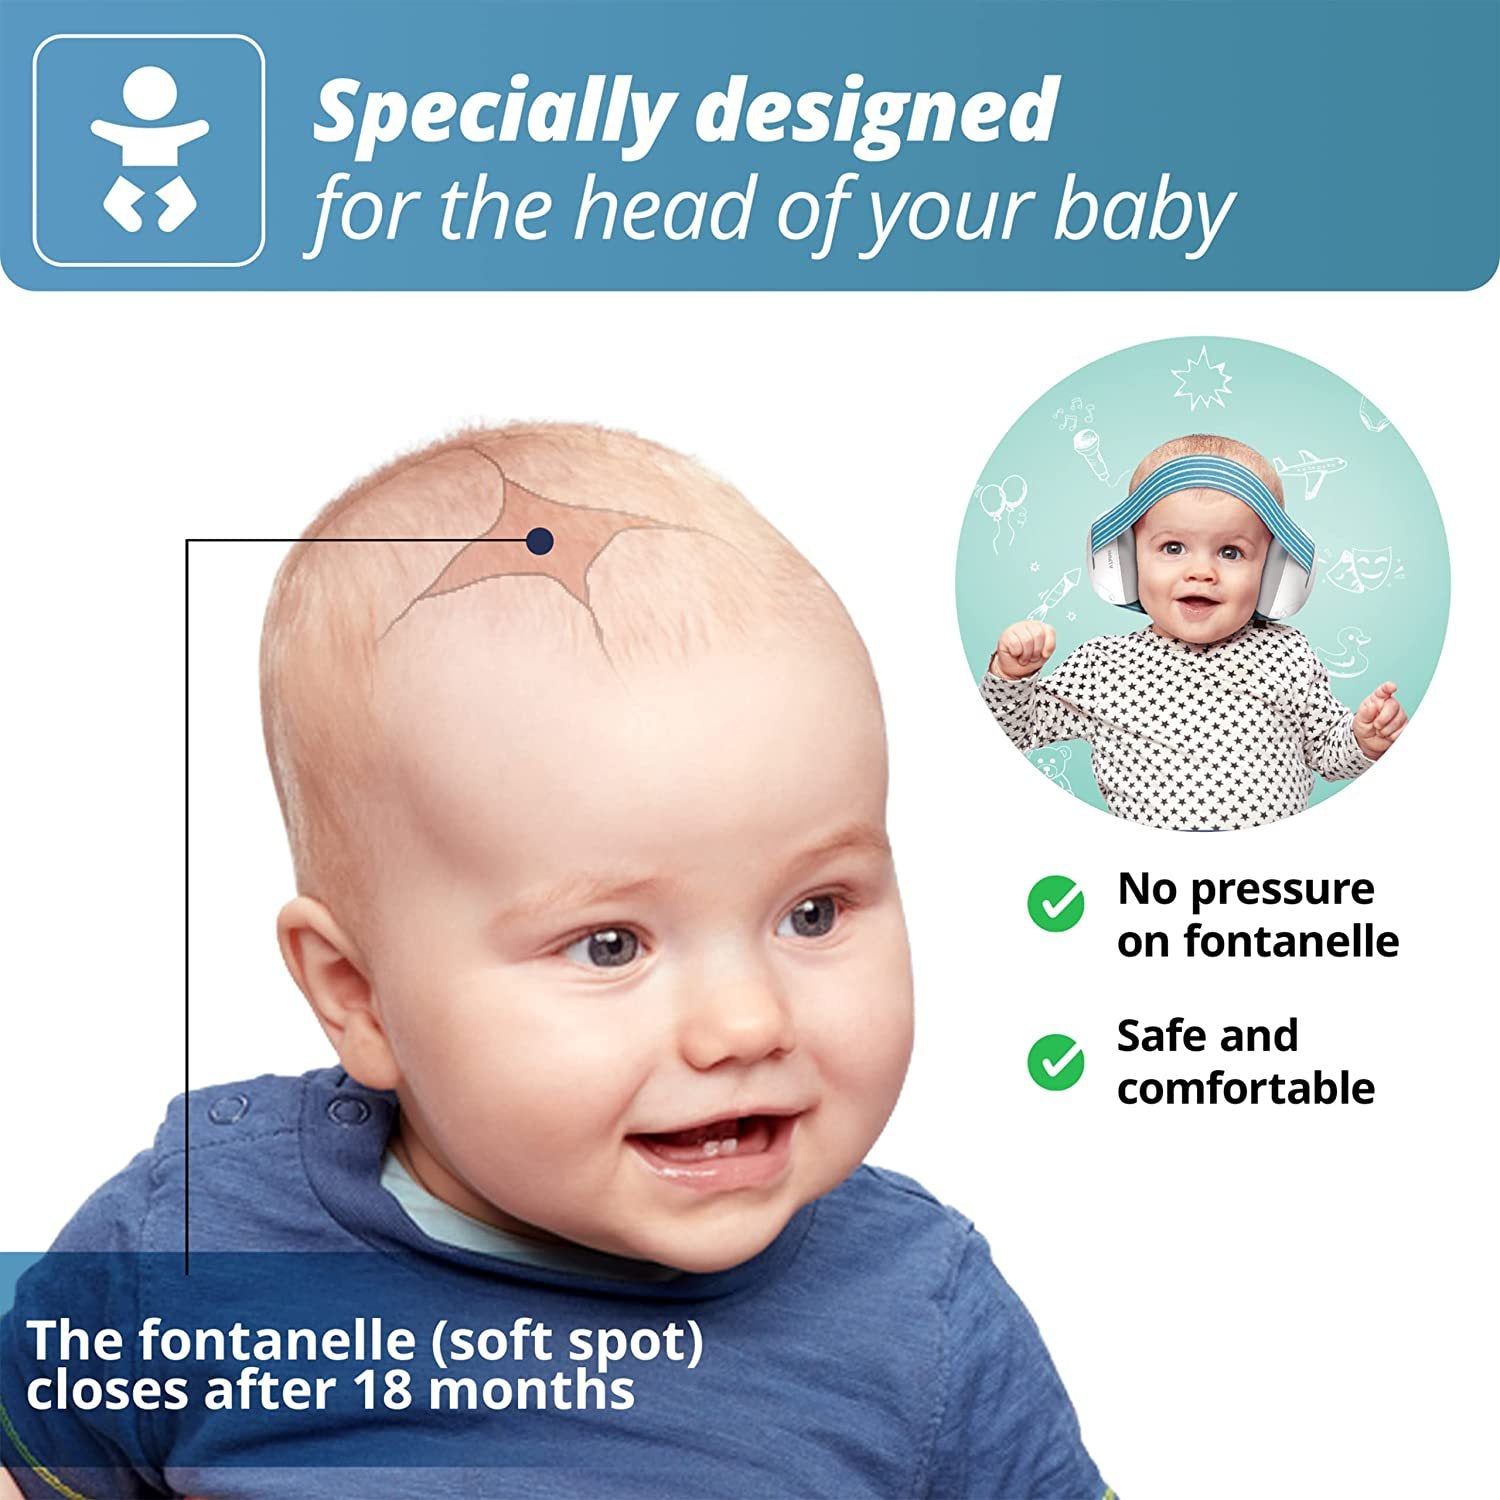 Baby Ear Protection for Babies and Toddlers Up to 36 Months Noise Reduction Earmuffs Comfortable Baby Headphones Improve Sleep